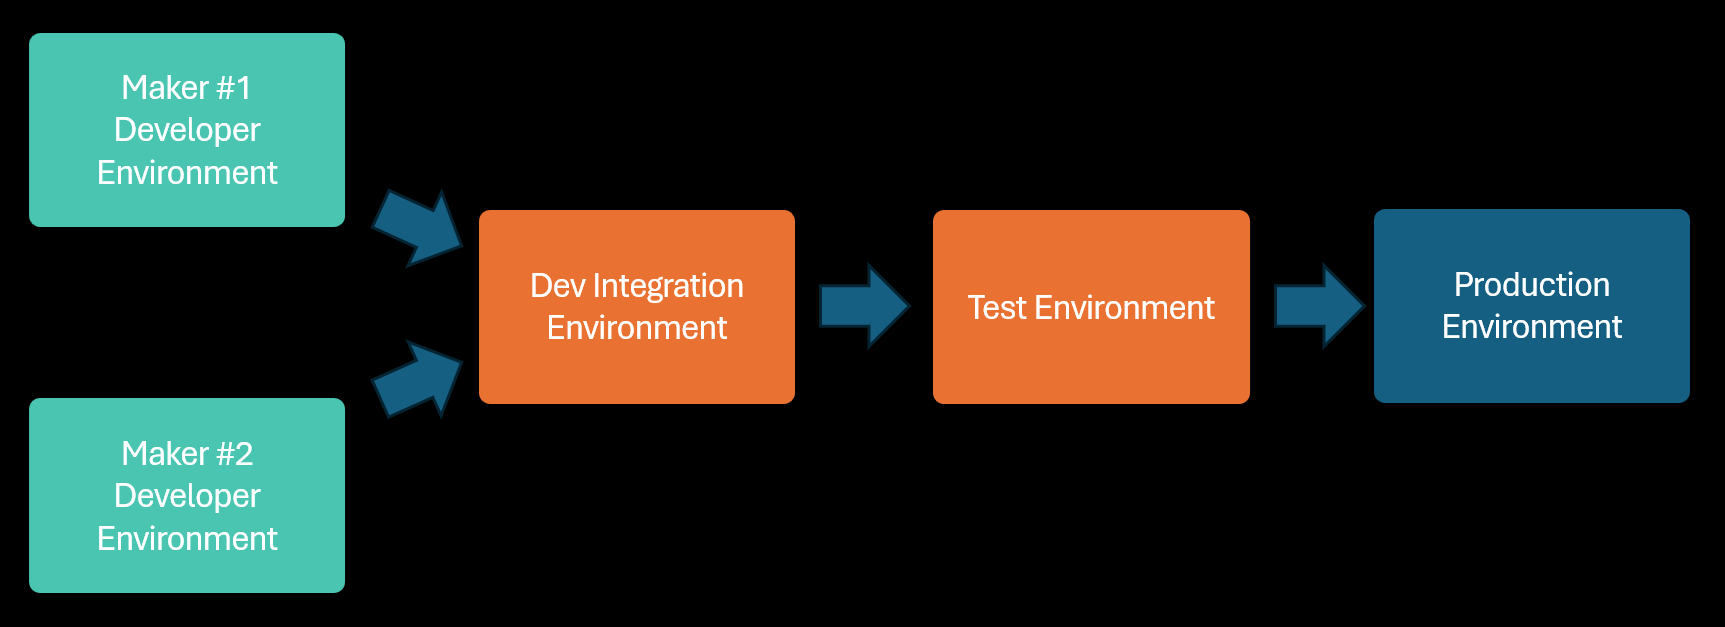 Diagram illustrating an enterprise app under development in individual environments  combined in a shared integration environment  and then tested and deployed in environments that are shared with other apps